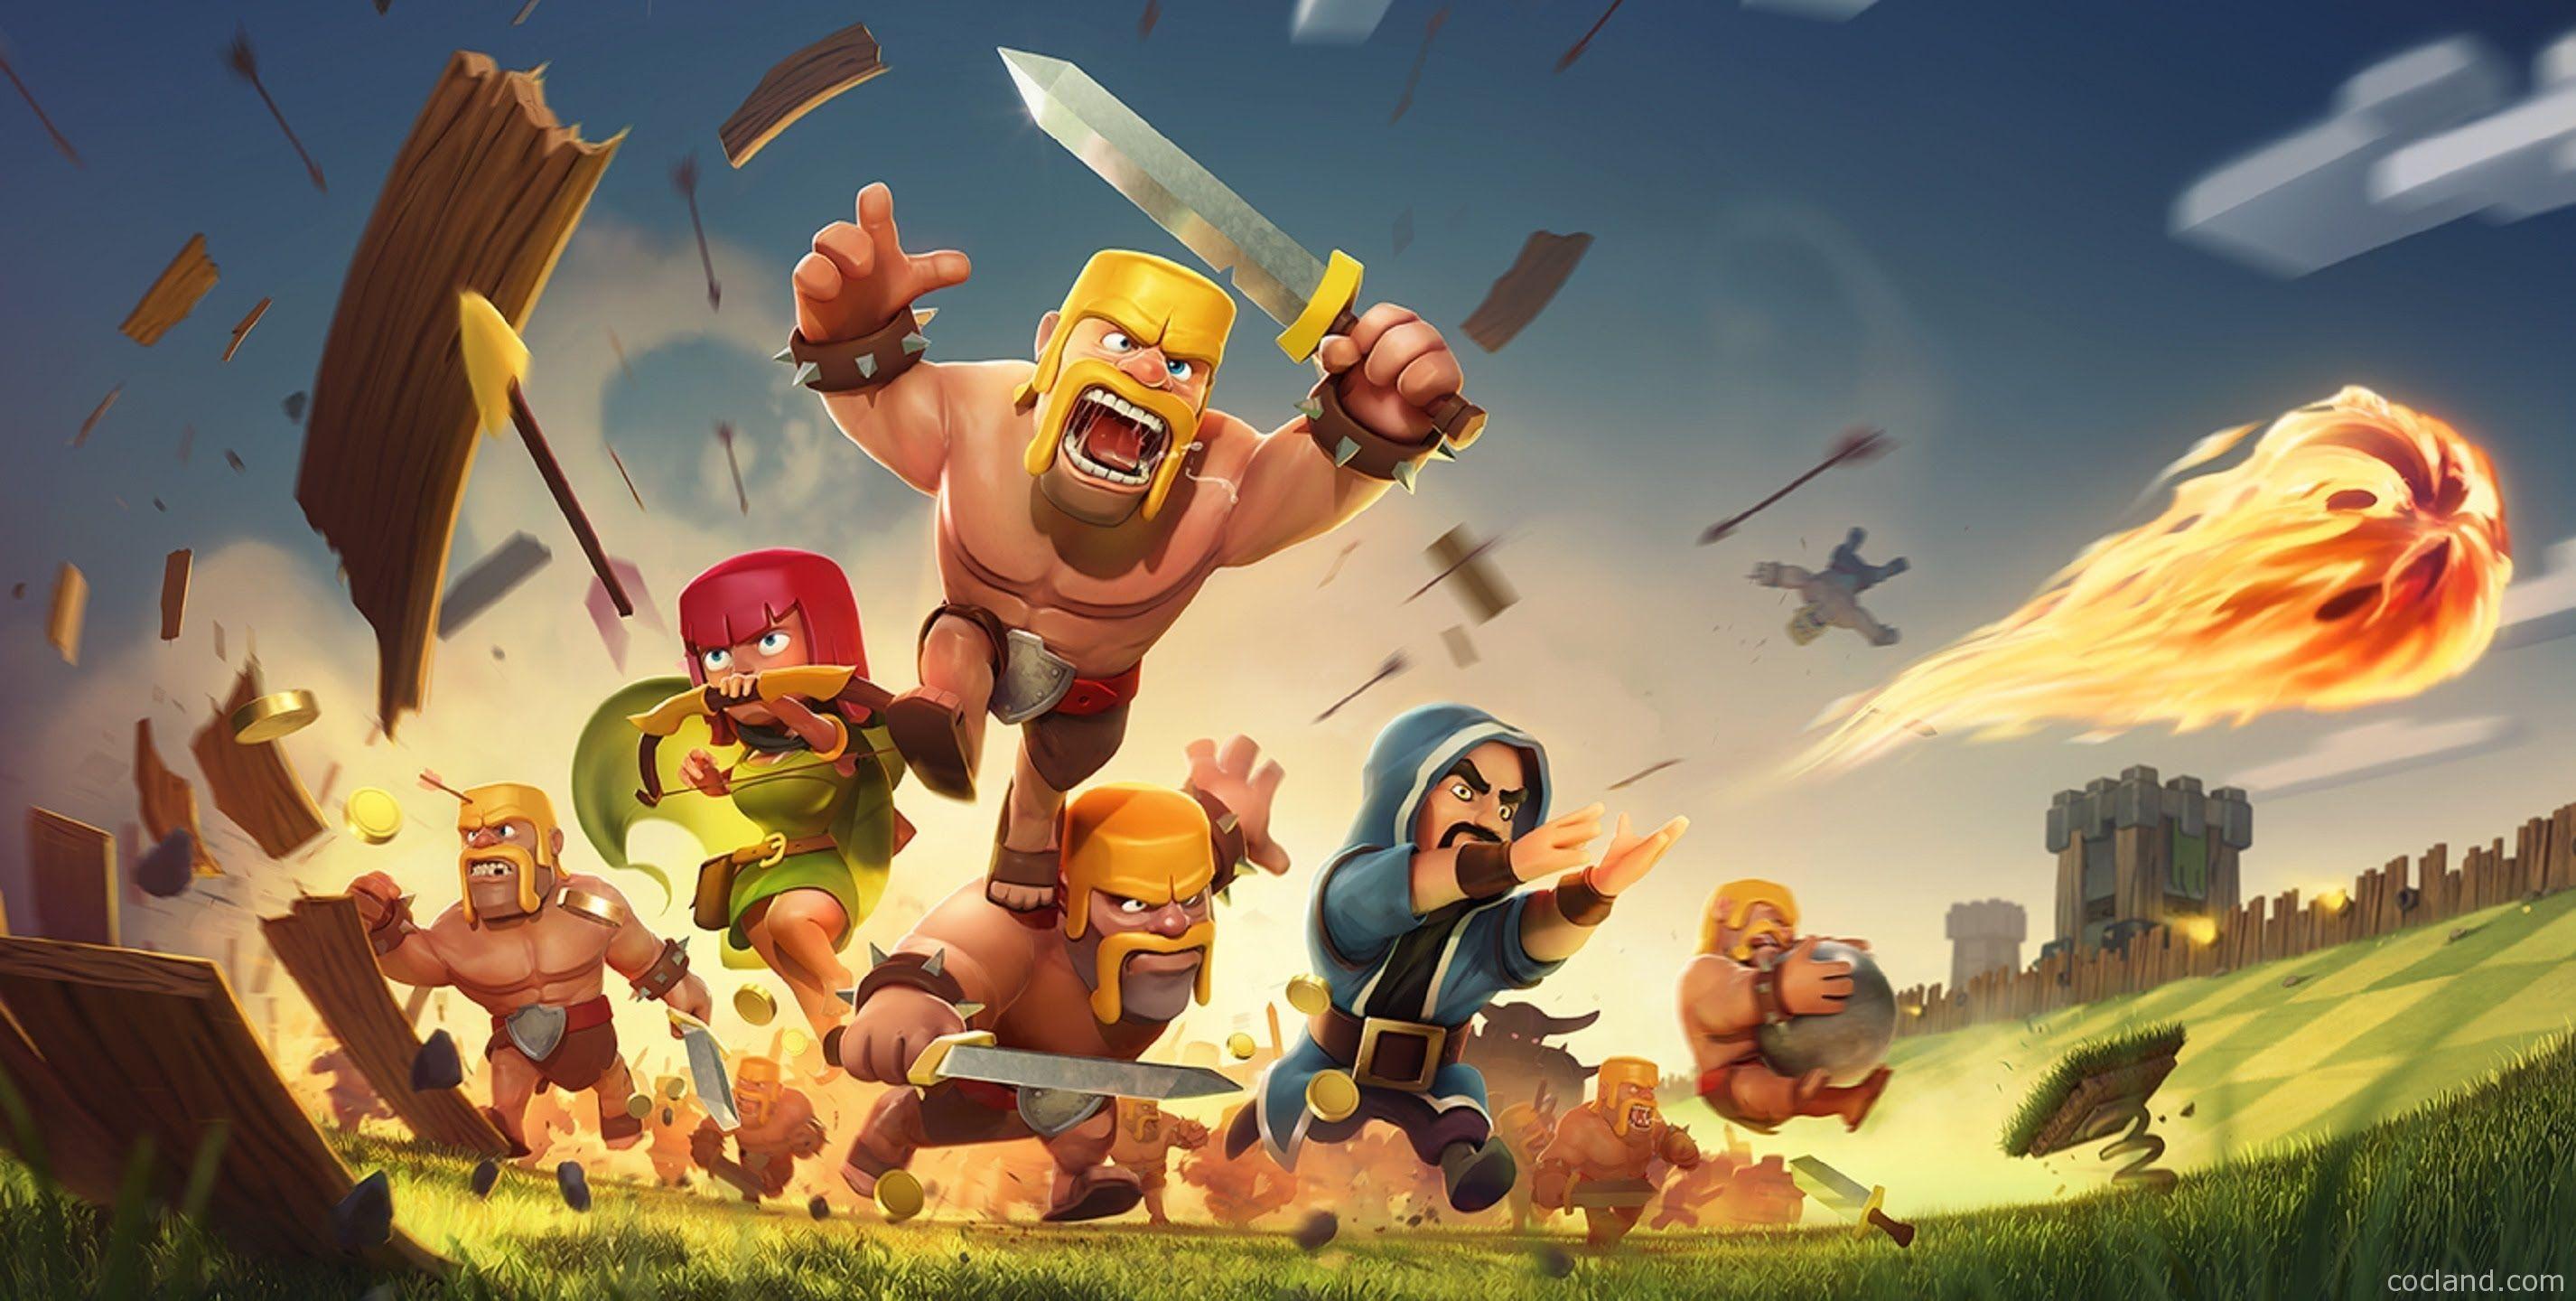 Clash of Clans Wallpapers - Top Free Clash of Clans Backgrounds -  WallpaperAccess